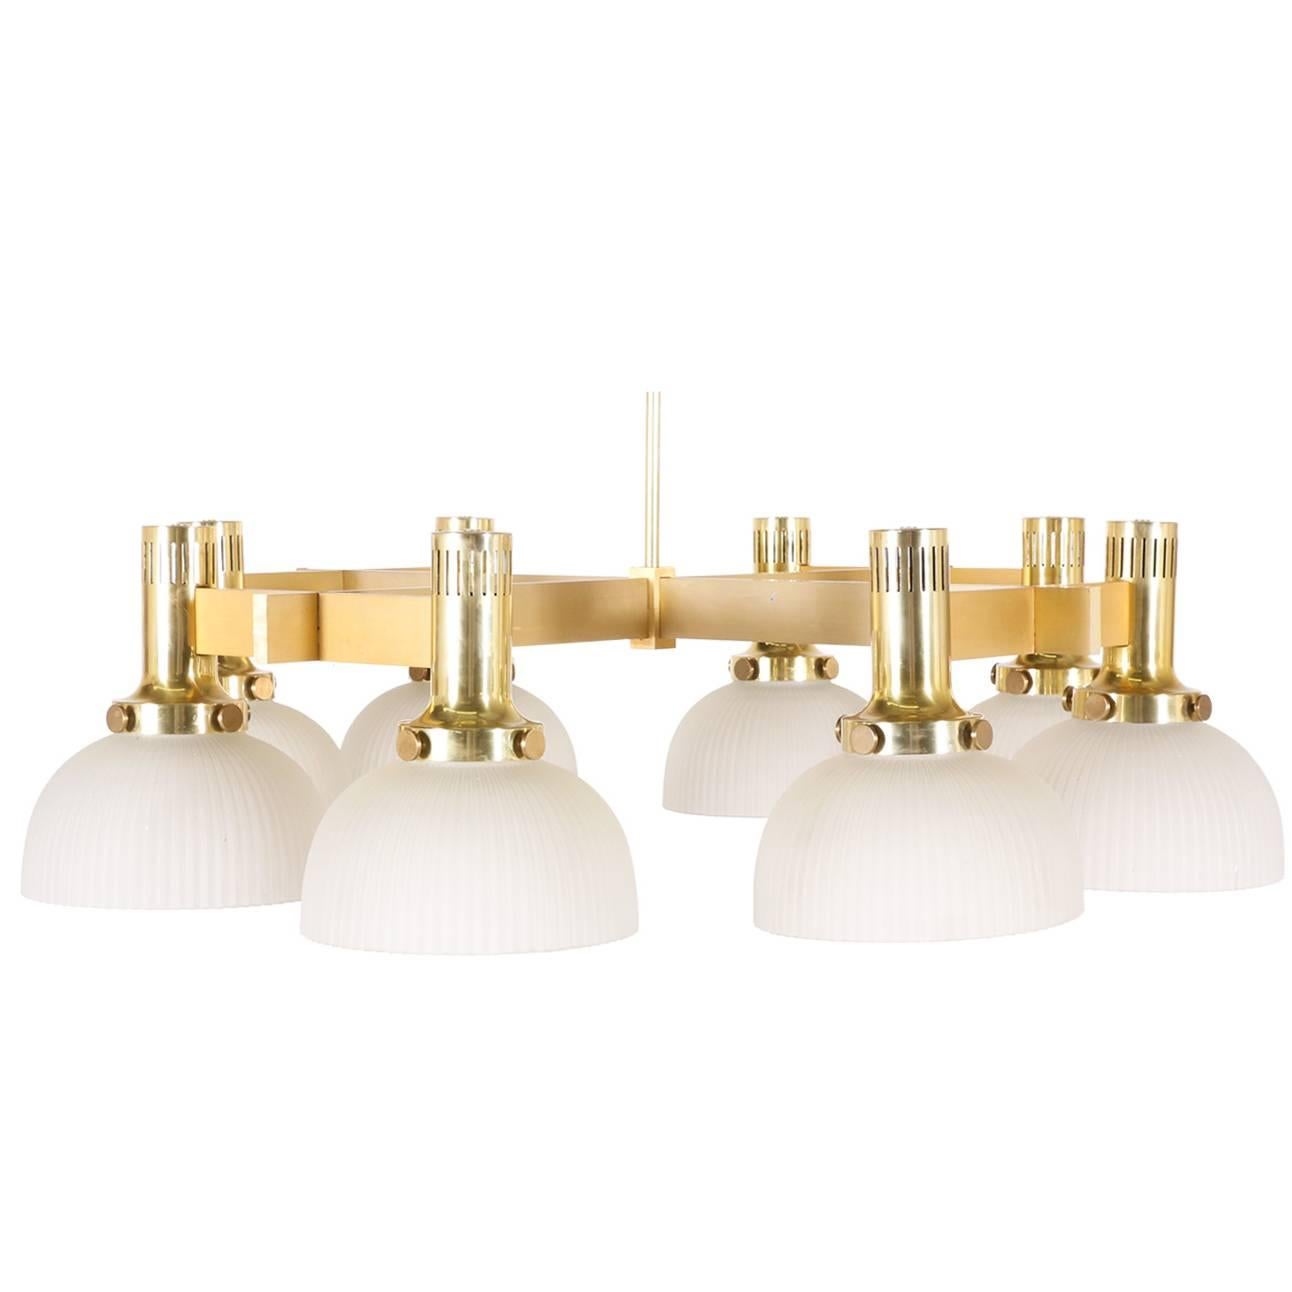 Large Eight-Arm Brass Chandelier with Frosted Shades by Lightolier